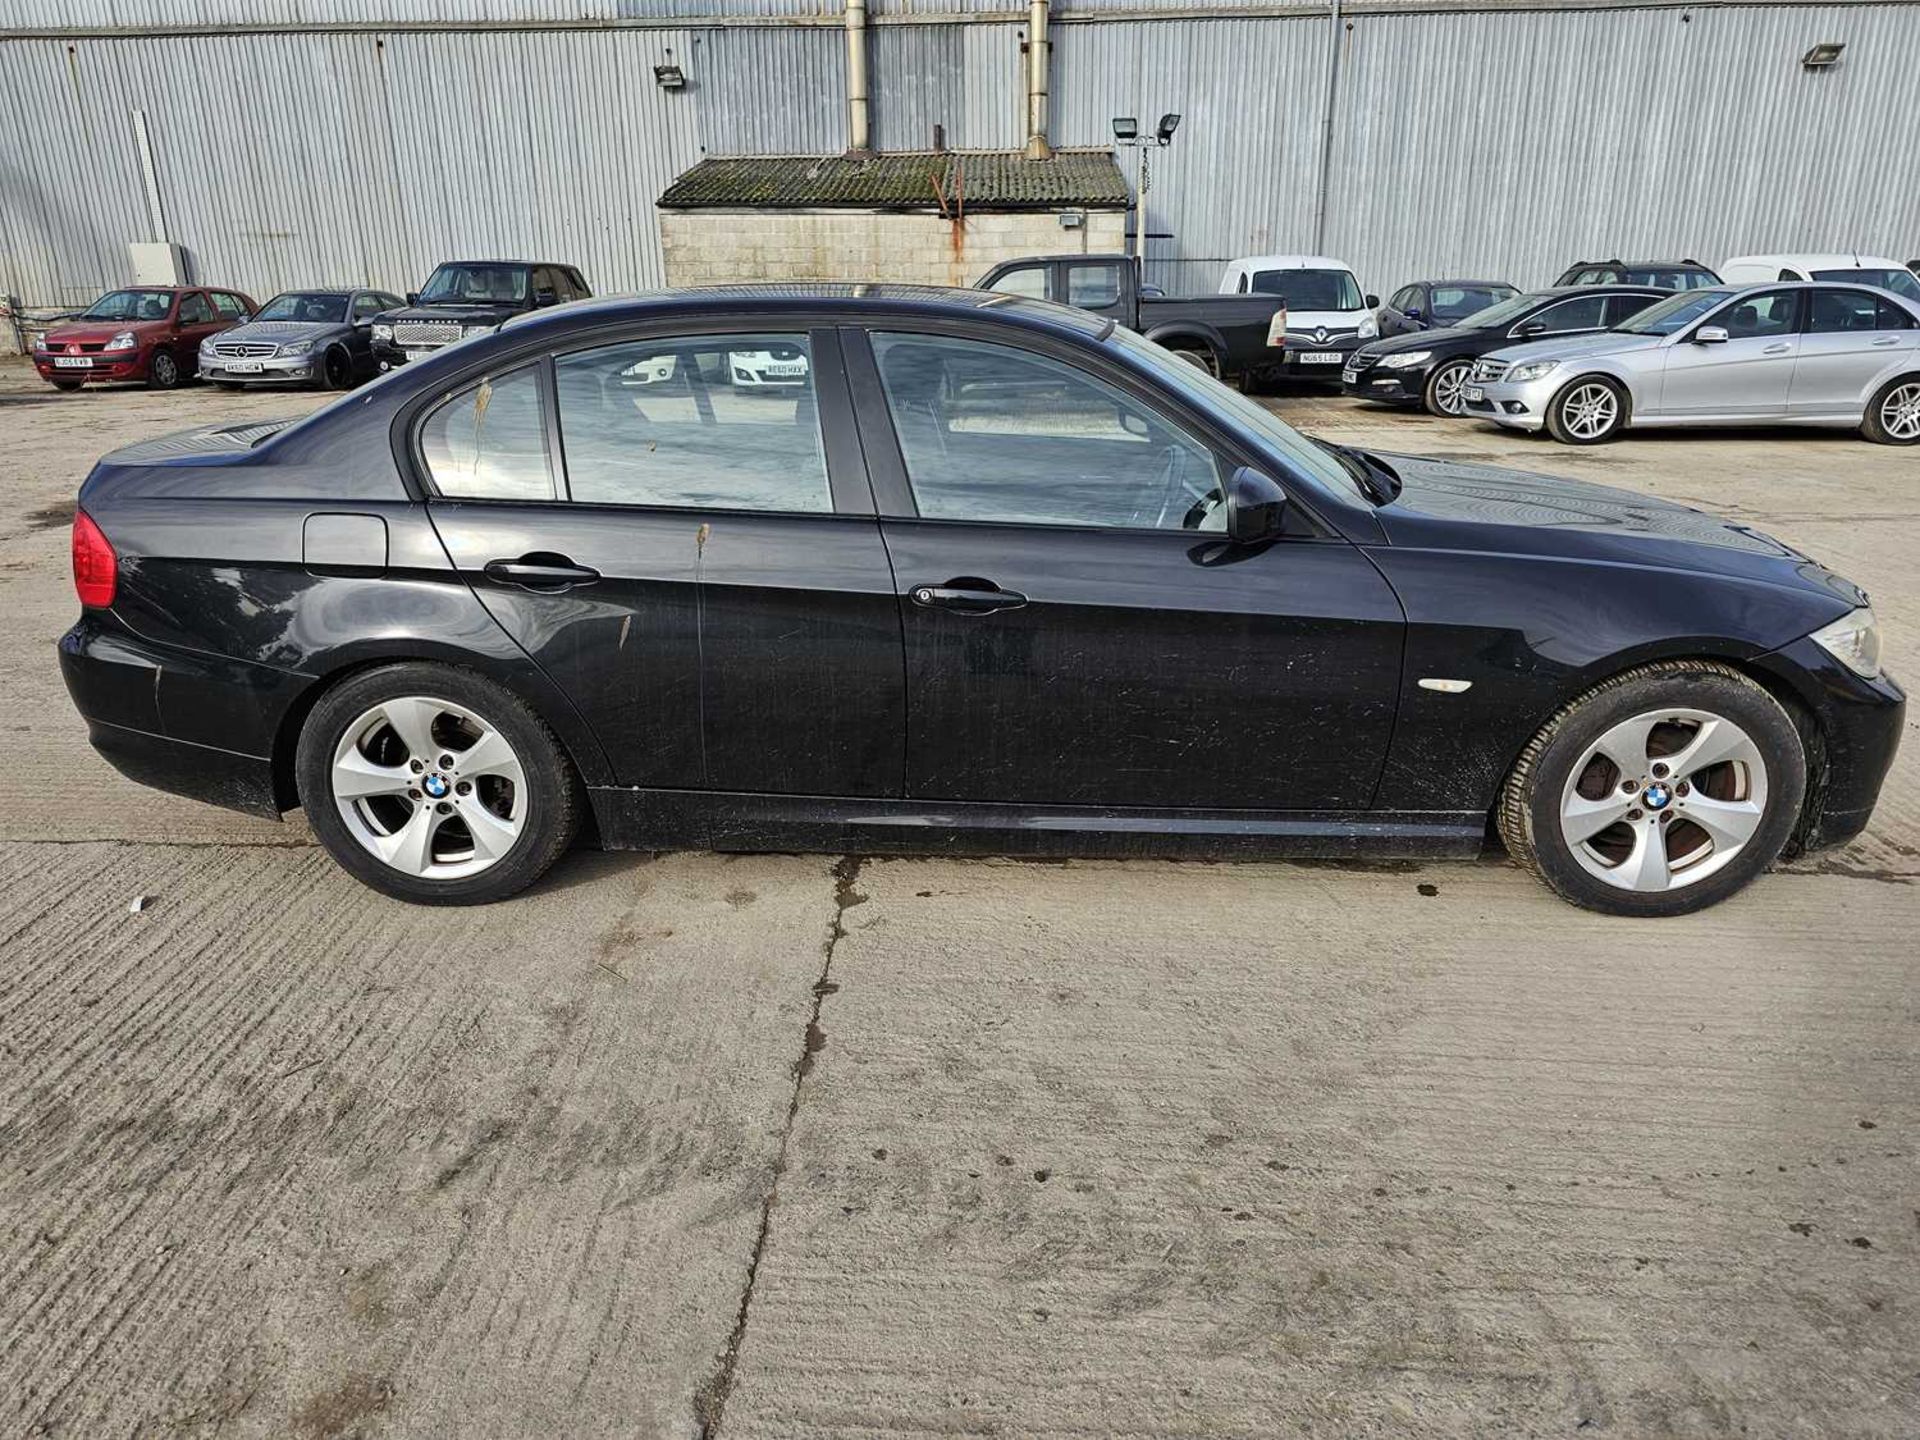 2011 BMW 320D, 6 Speed, Parking Sensors, Bluetooth, A/C (Reg. Docs. Available, Tested 01/25) - Image 6 of 28